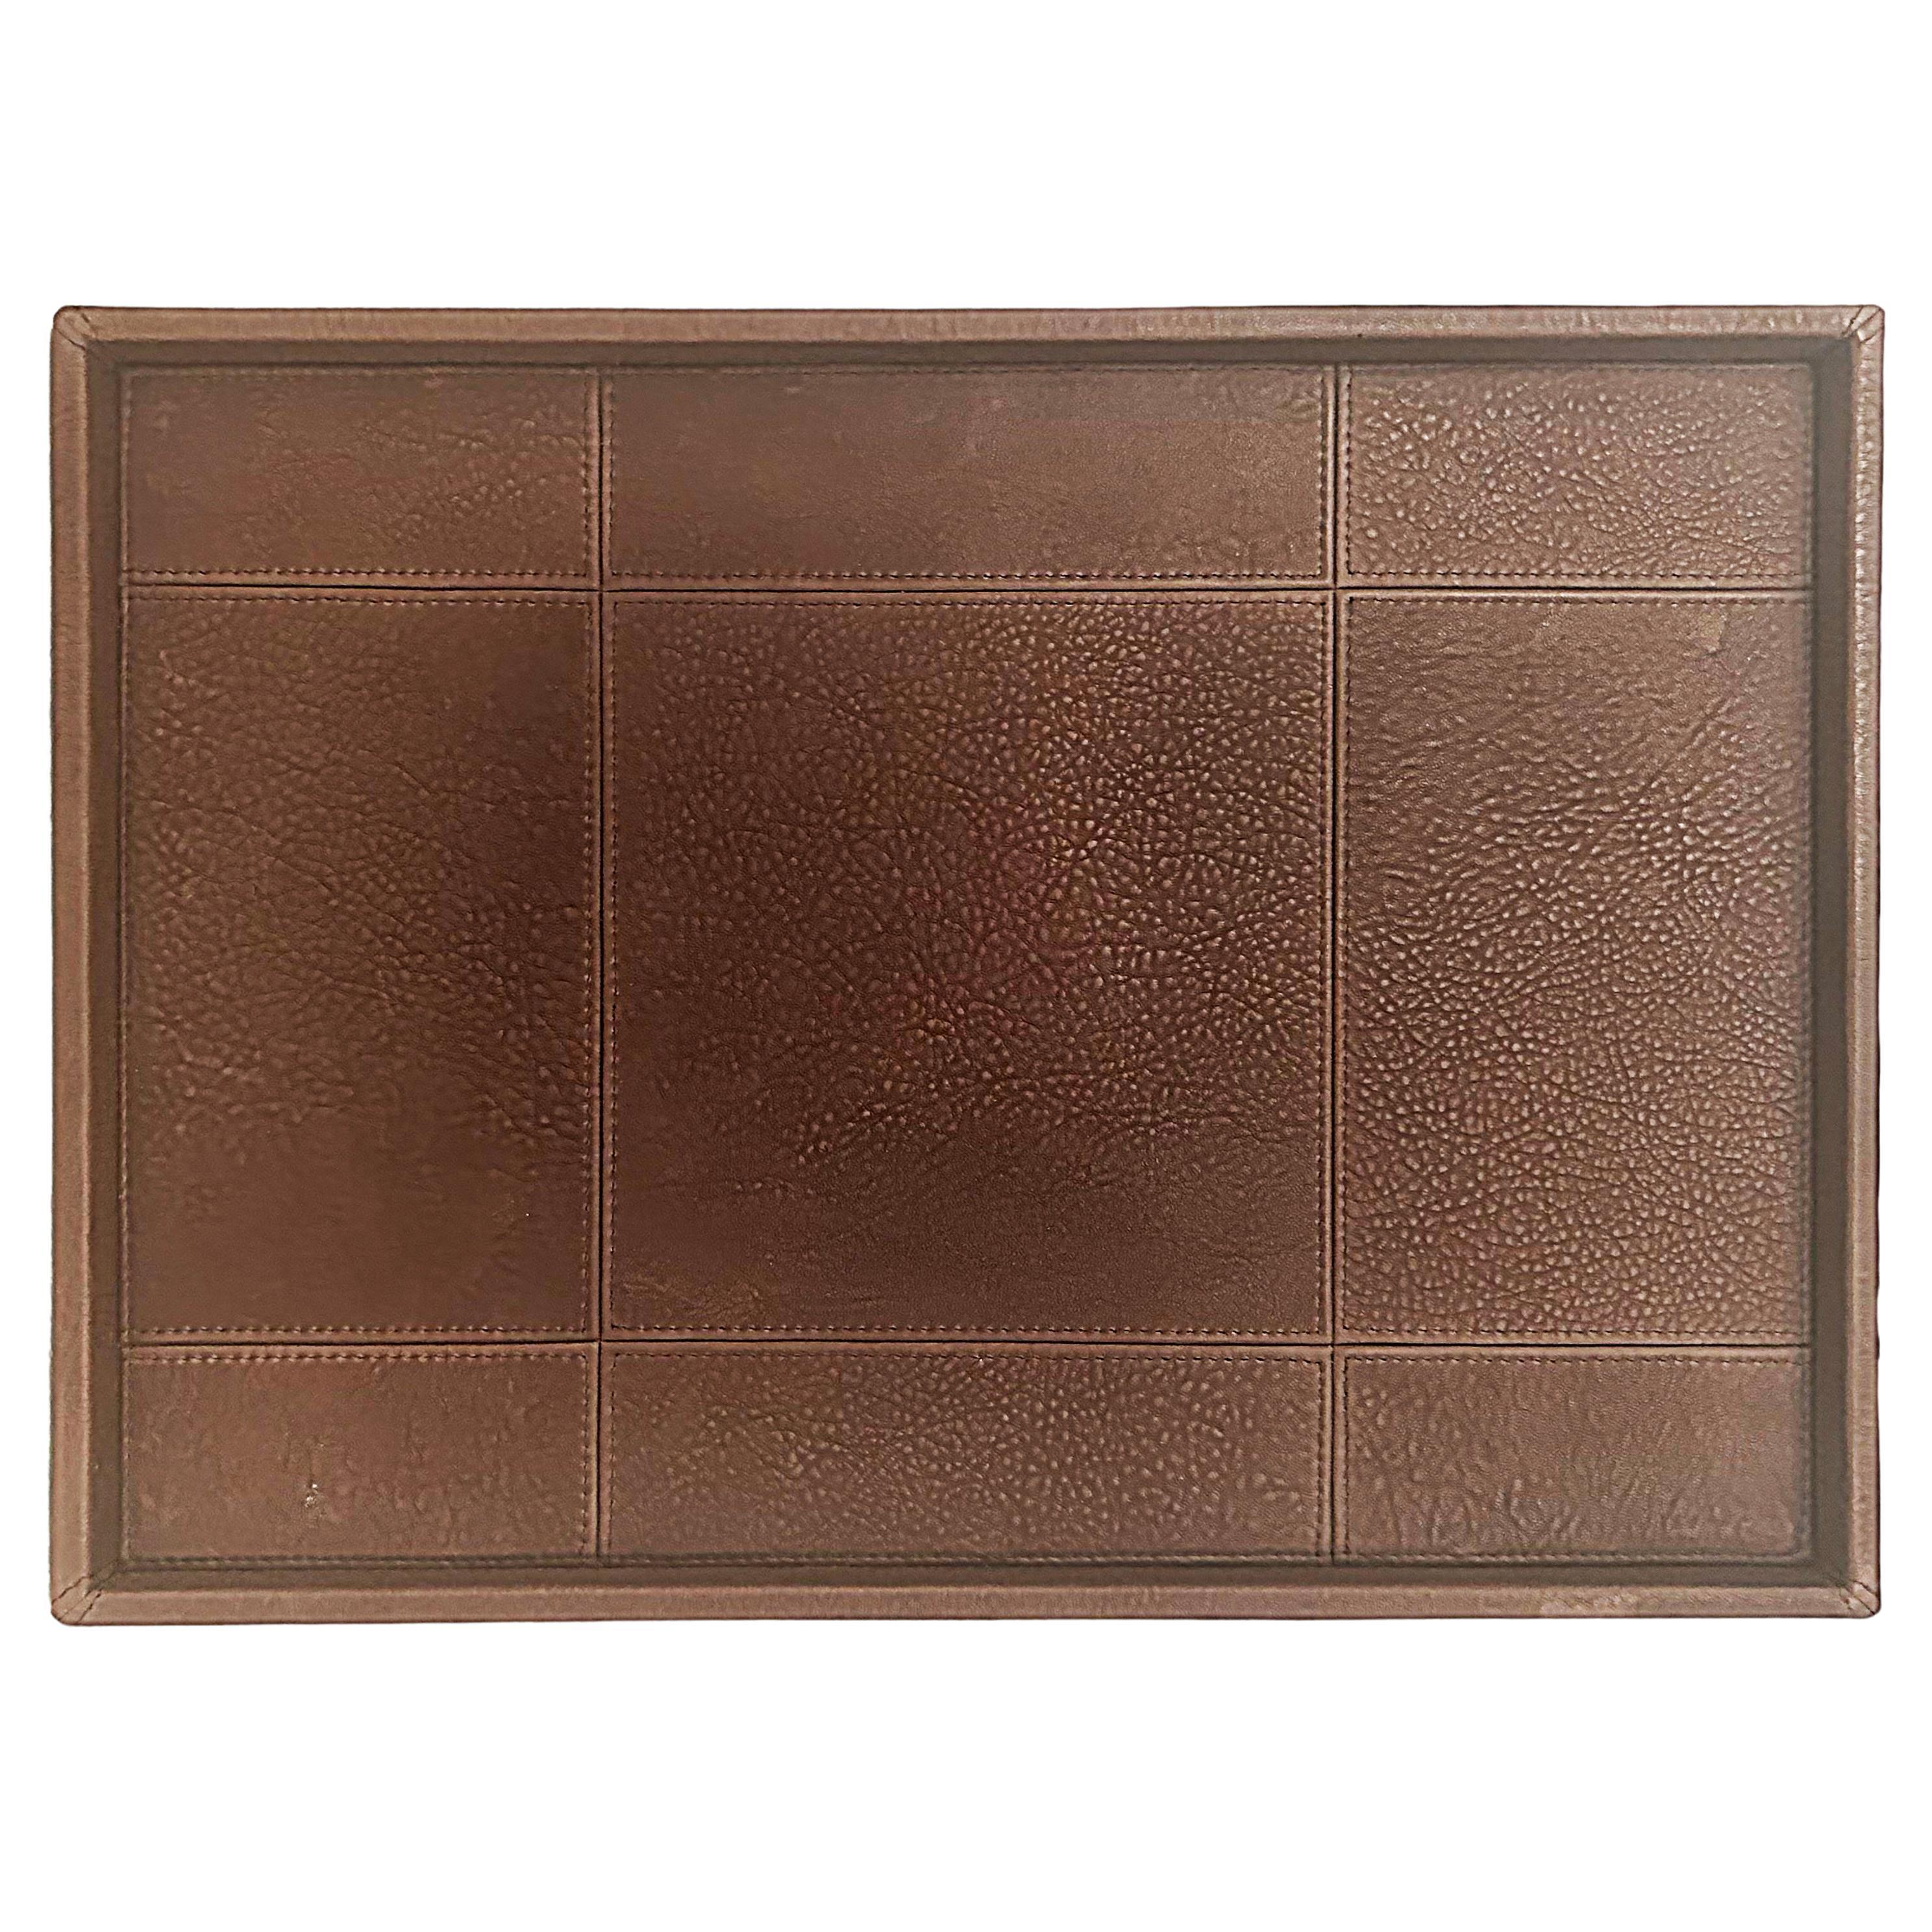 Gilles Caffier Leather Clad Vanity Tray Made in France 2006 For Sale